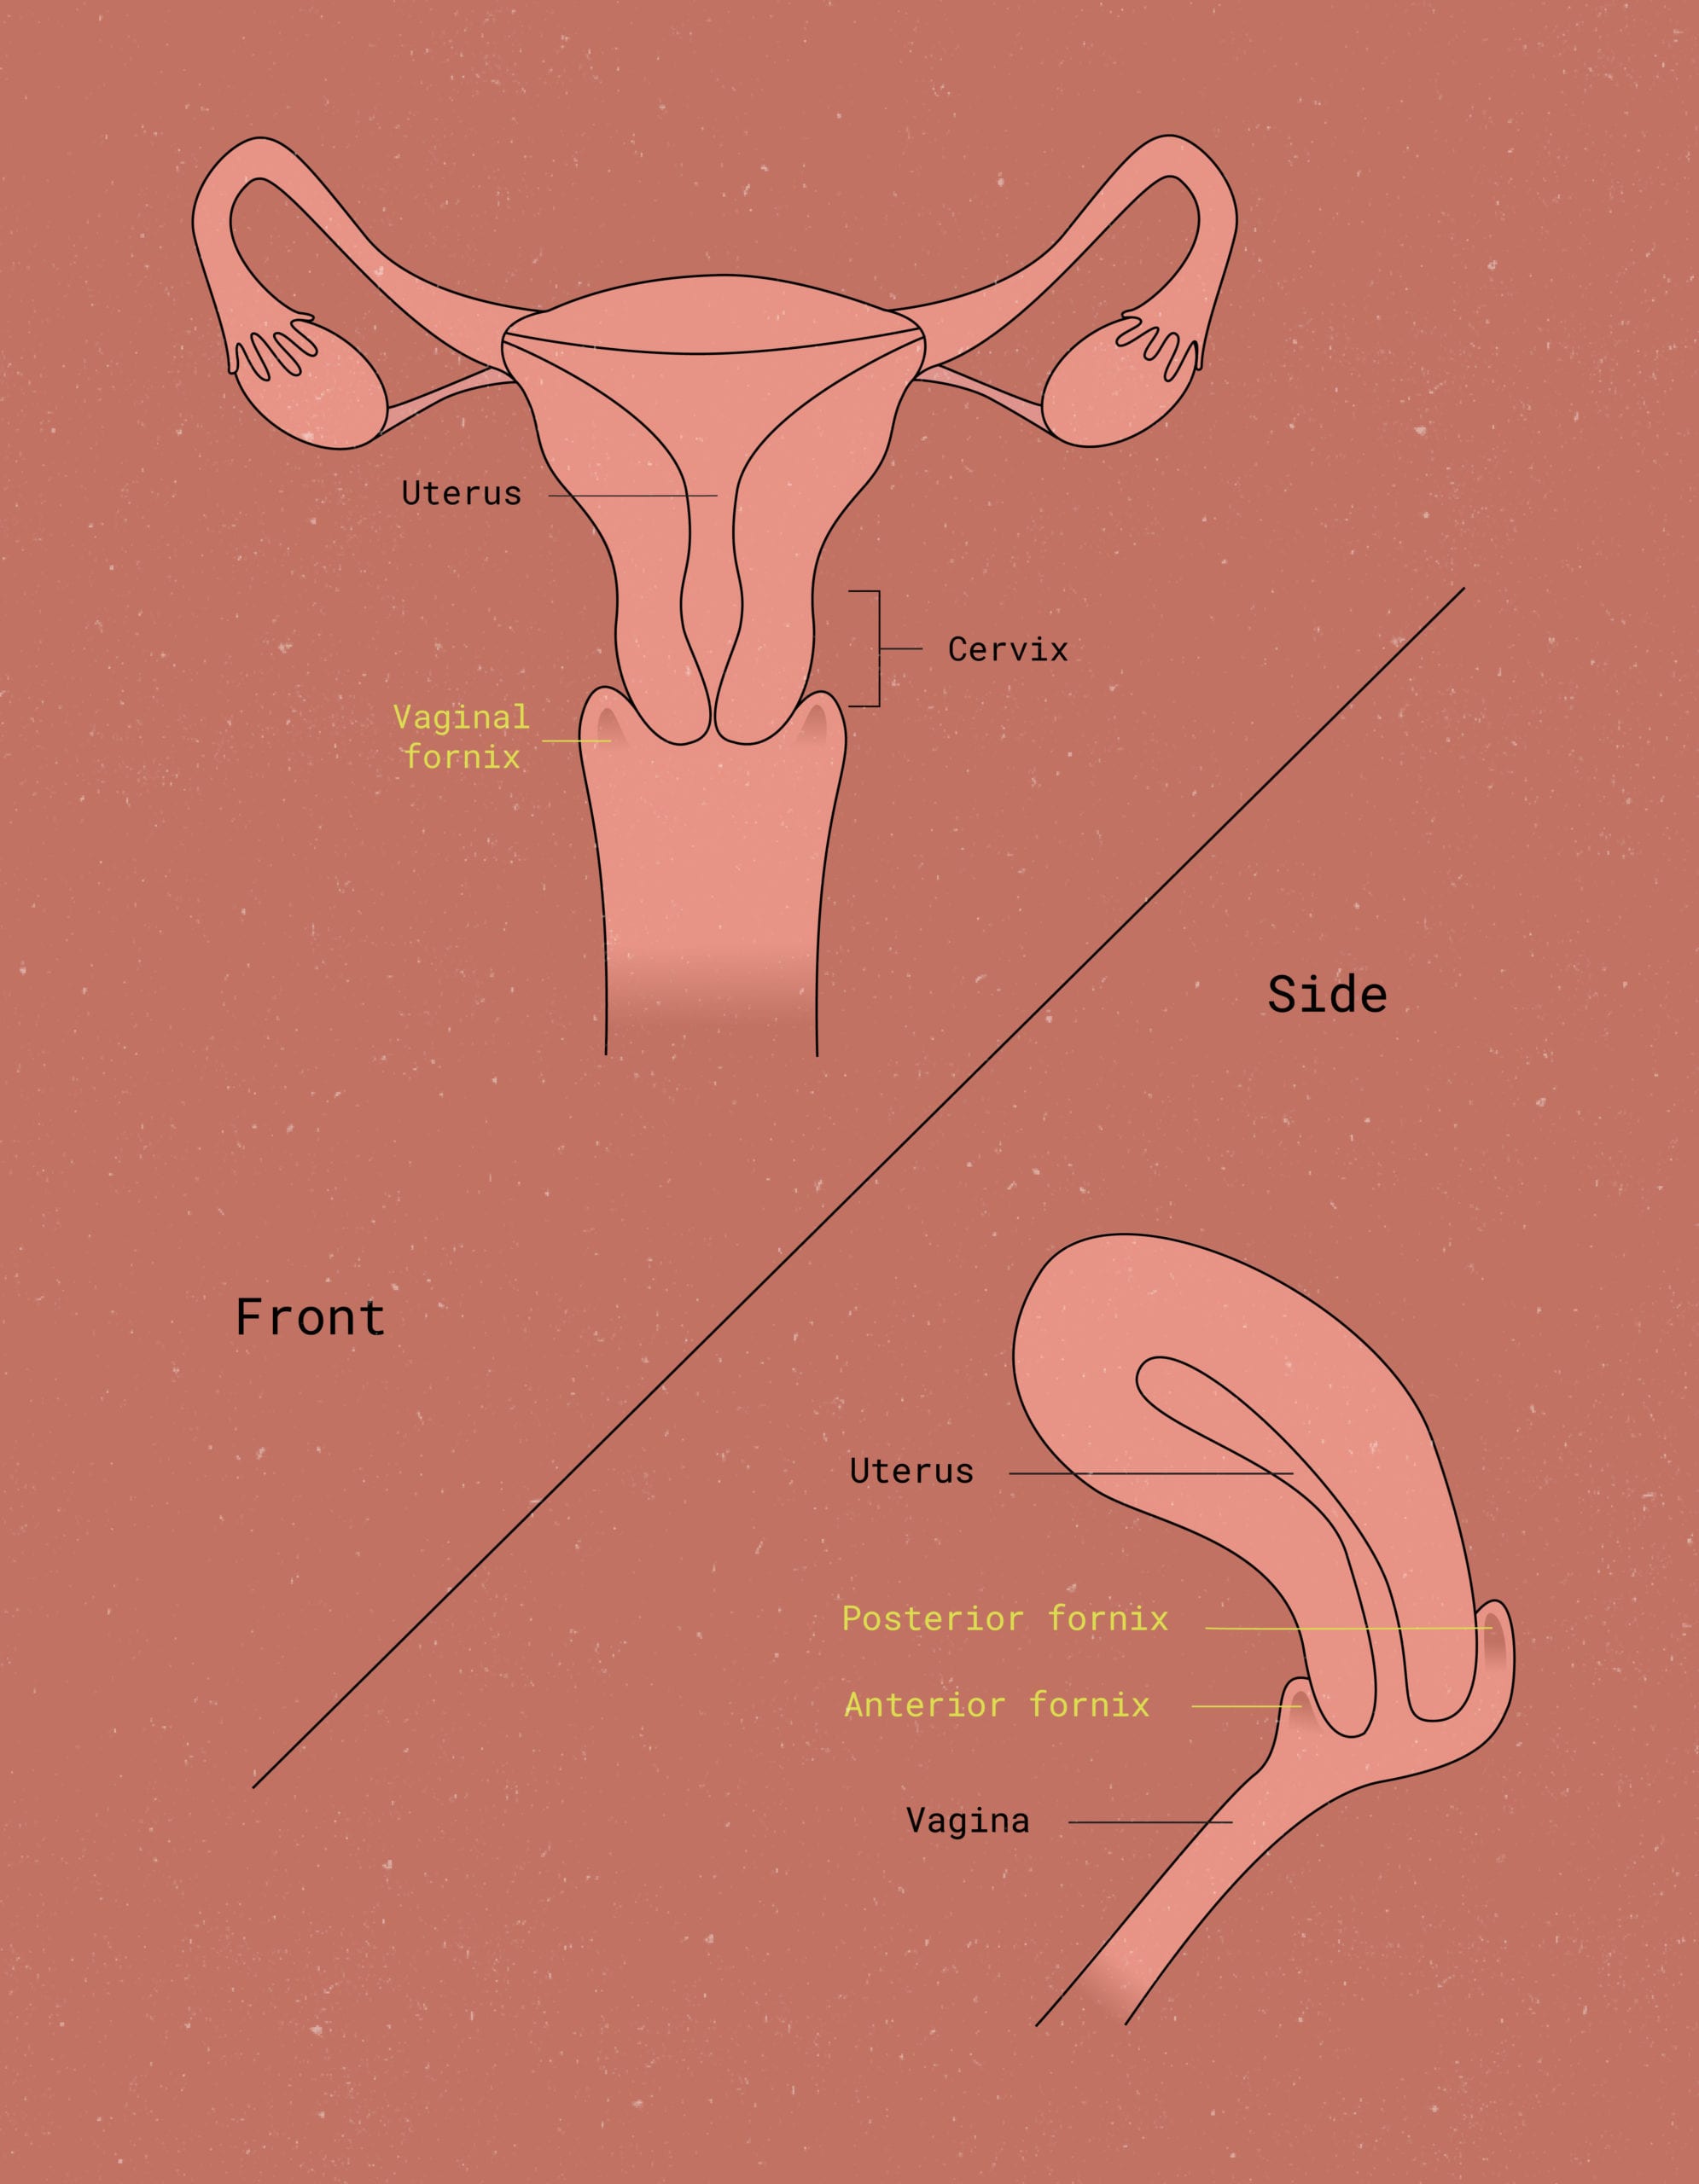 What is the vaginal<br></noscript> fornix?